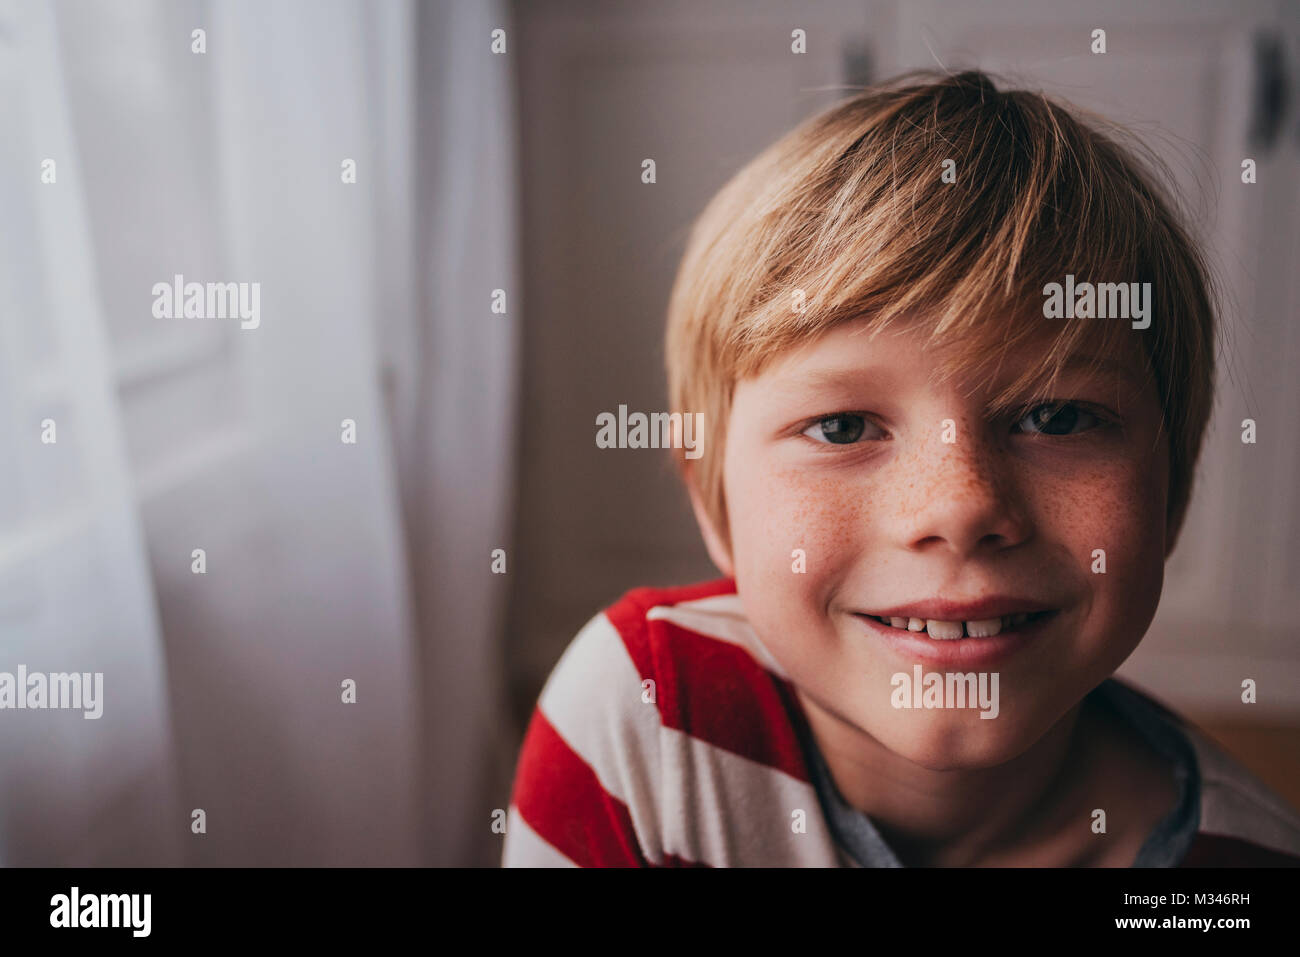 Portrait of a smiling boy with freckles Stock Photo